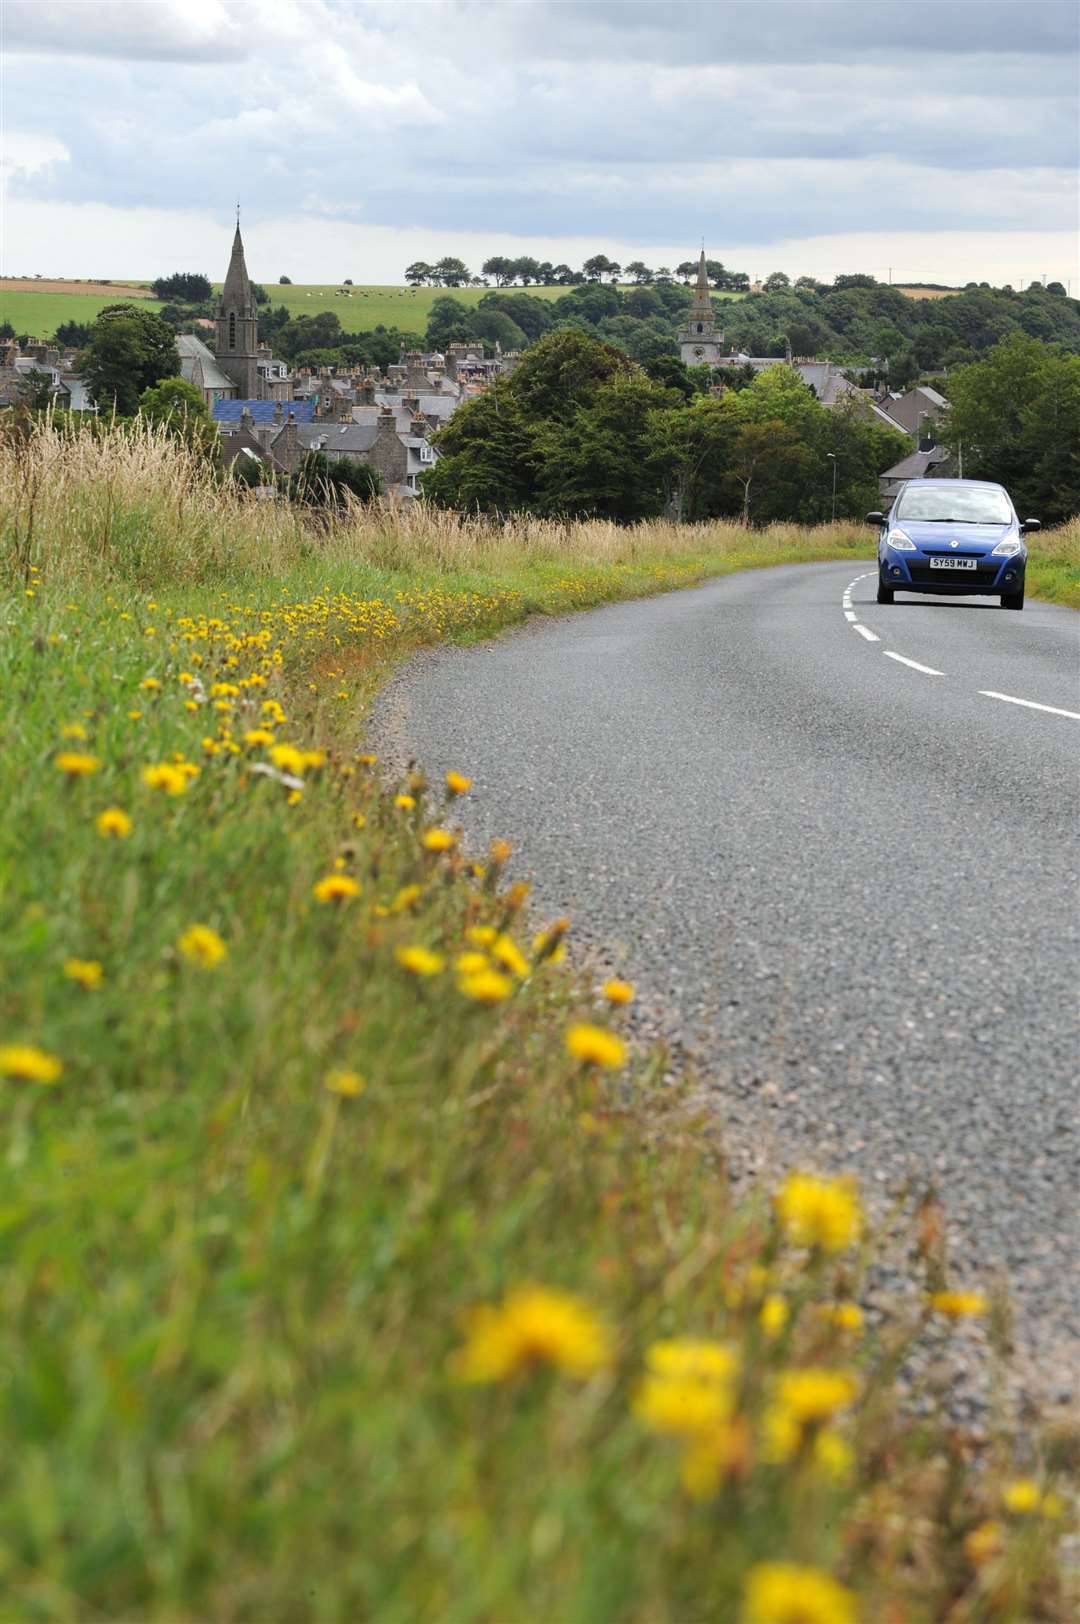 Verge cutting is about to begin in Aberdeenshire